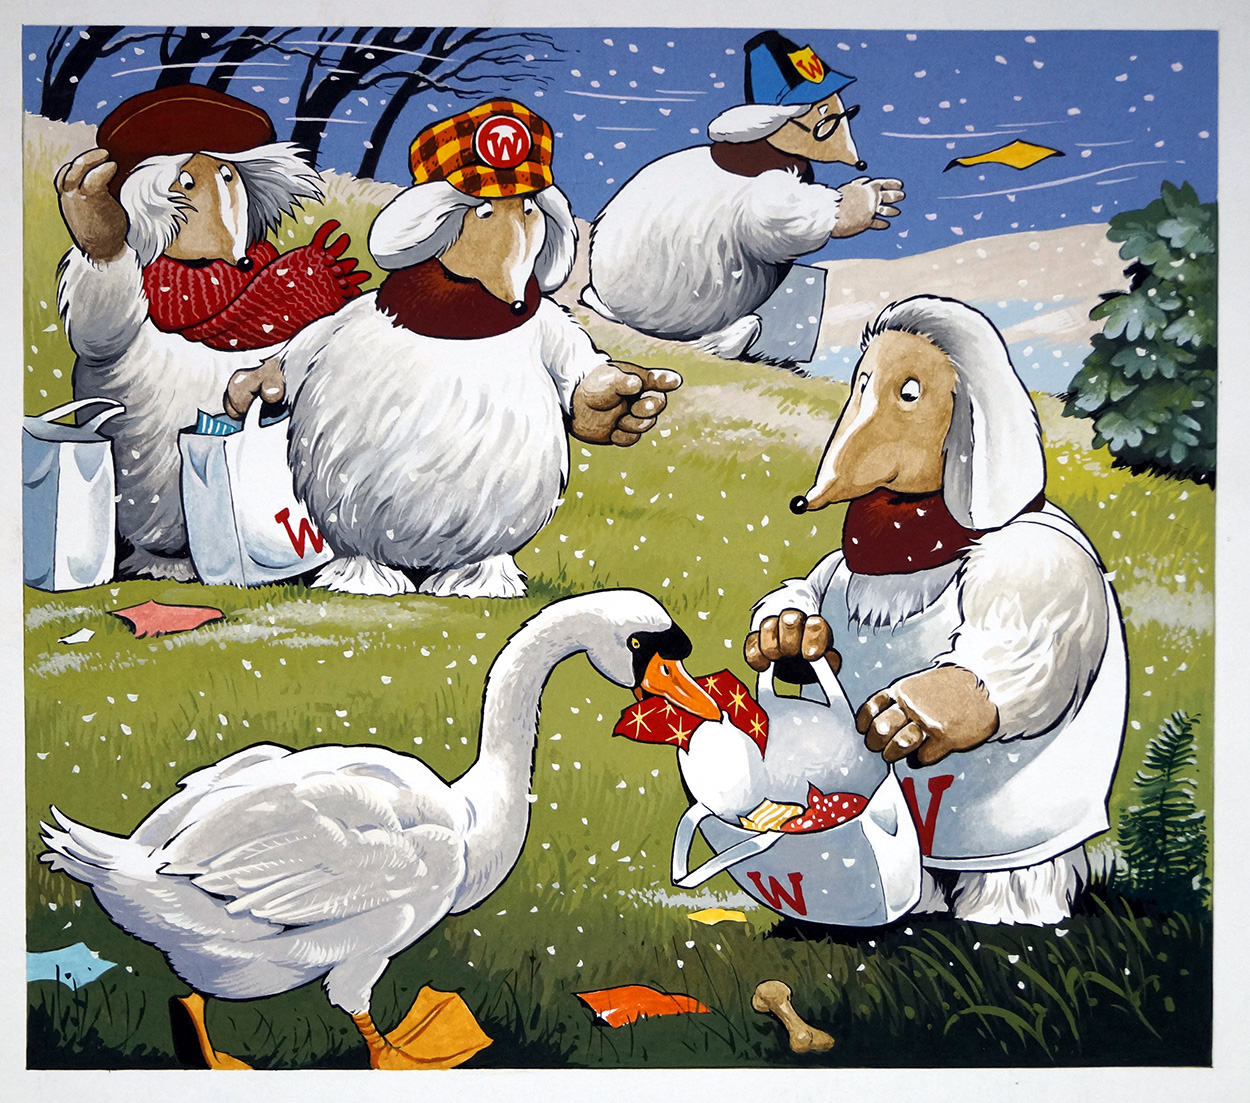 The Wombles: The Tidy Swan (TWO pages) (Originals) art by The Wombles (Blasco) at The Illustration Art Gallery